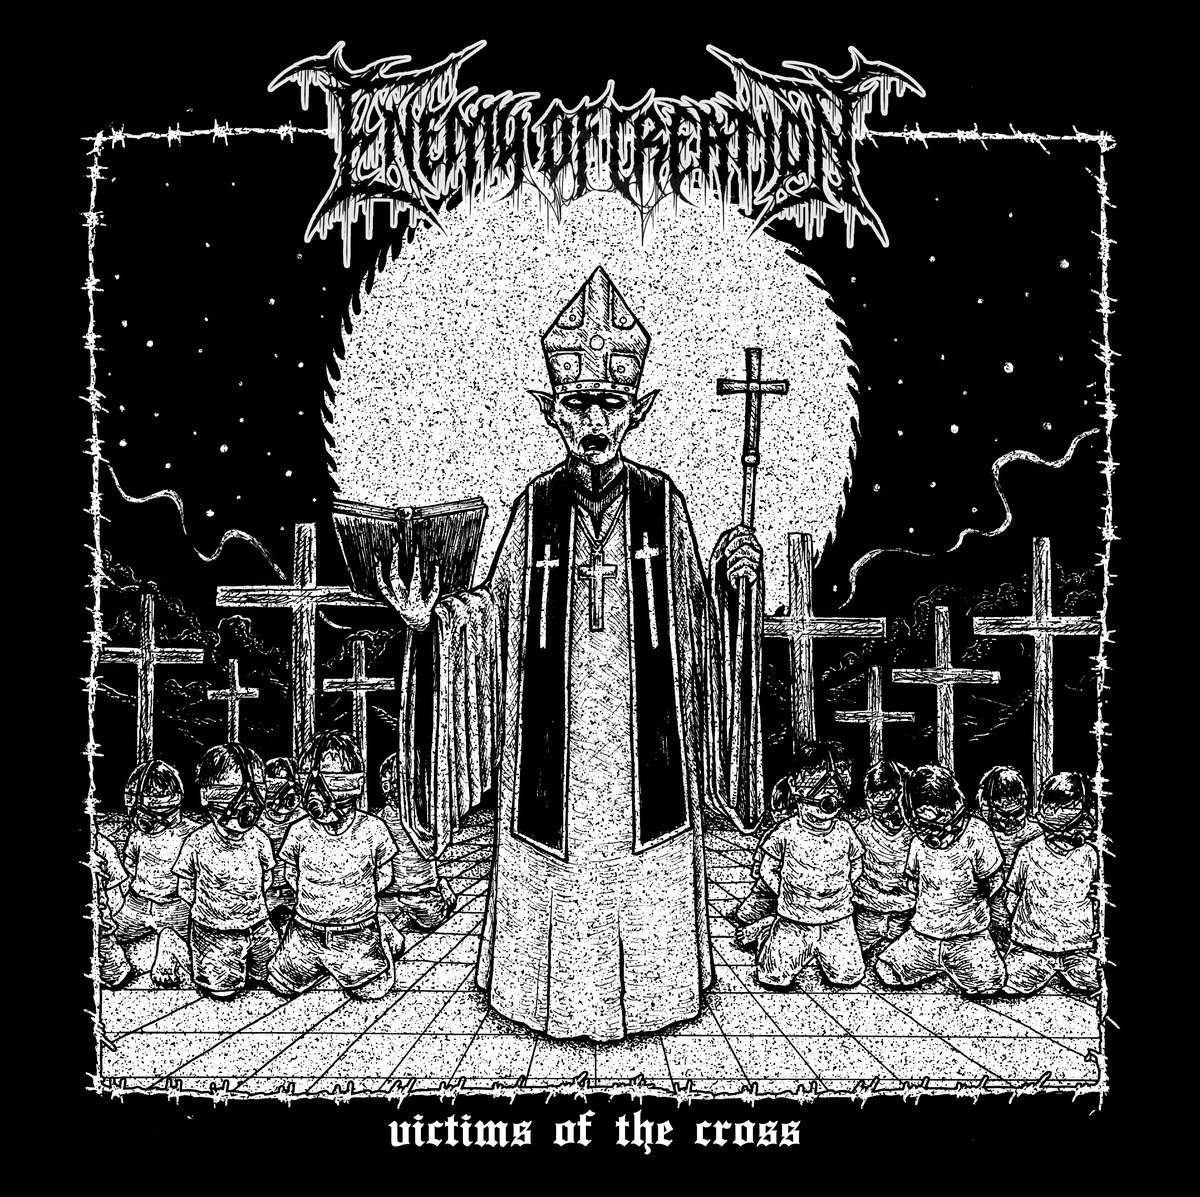 Victims of the Cross cover by ENEMY OF THE CREATION